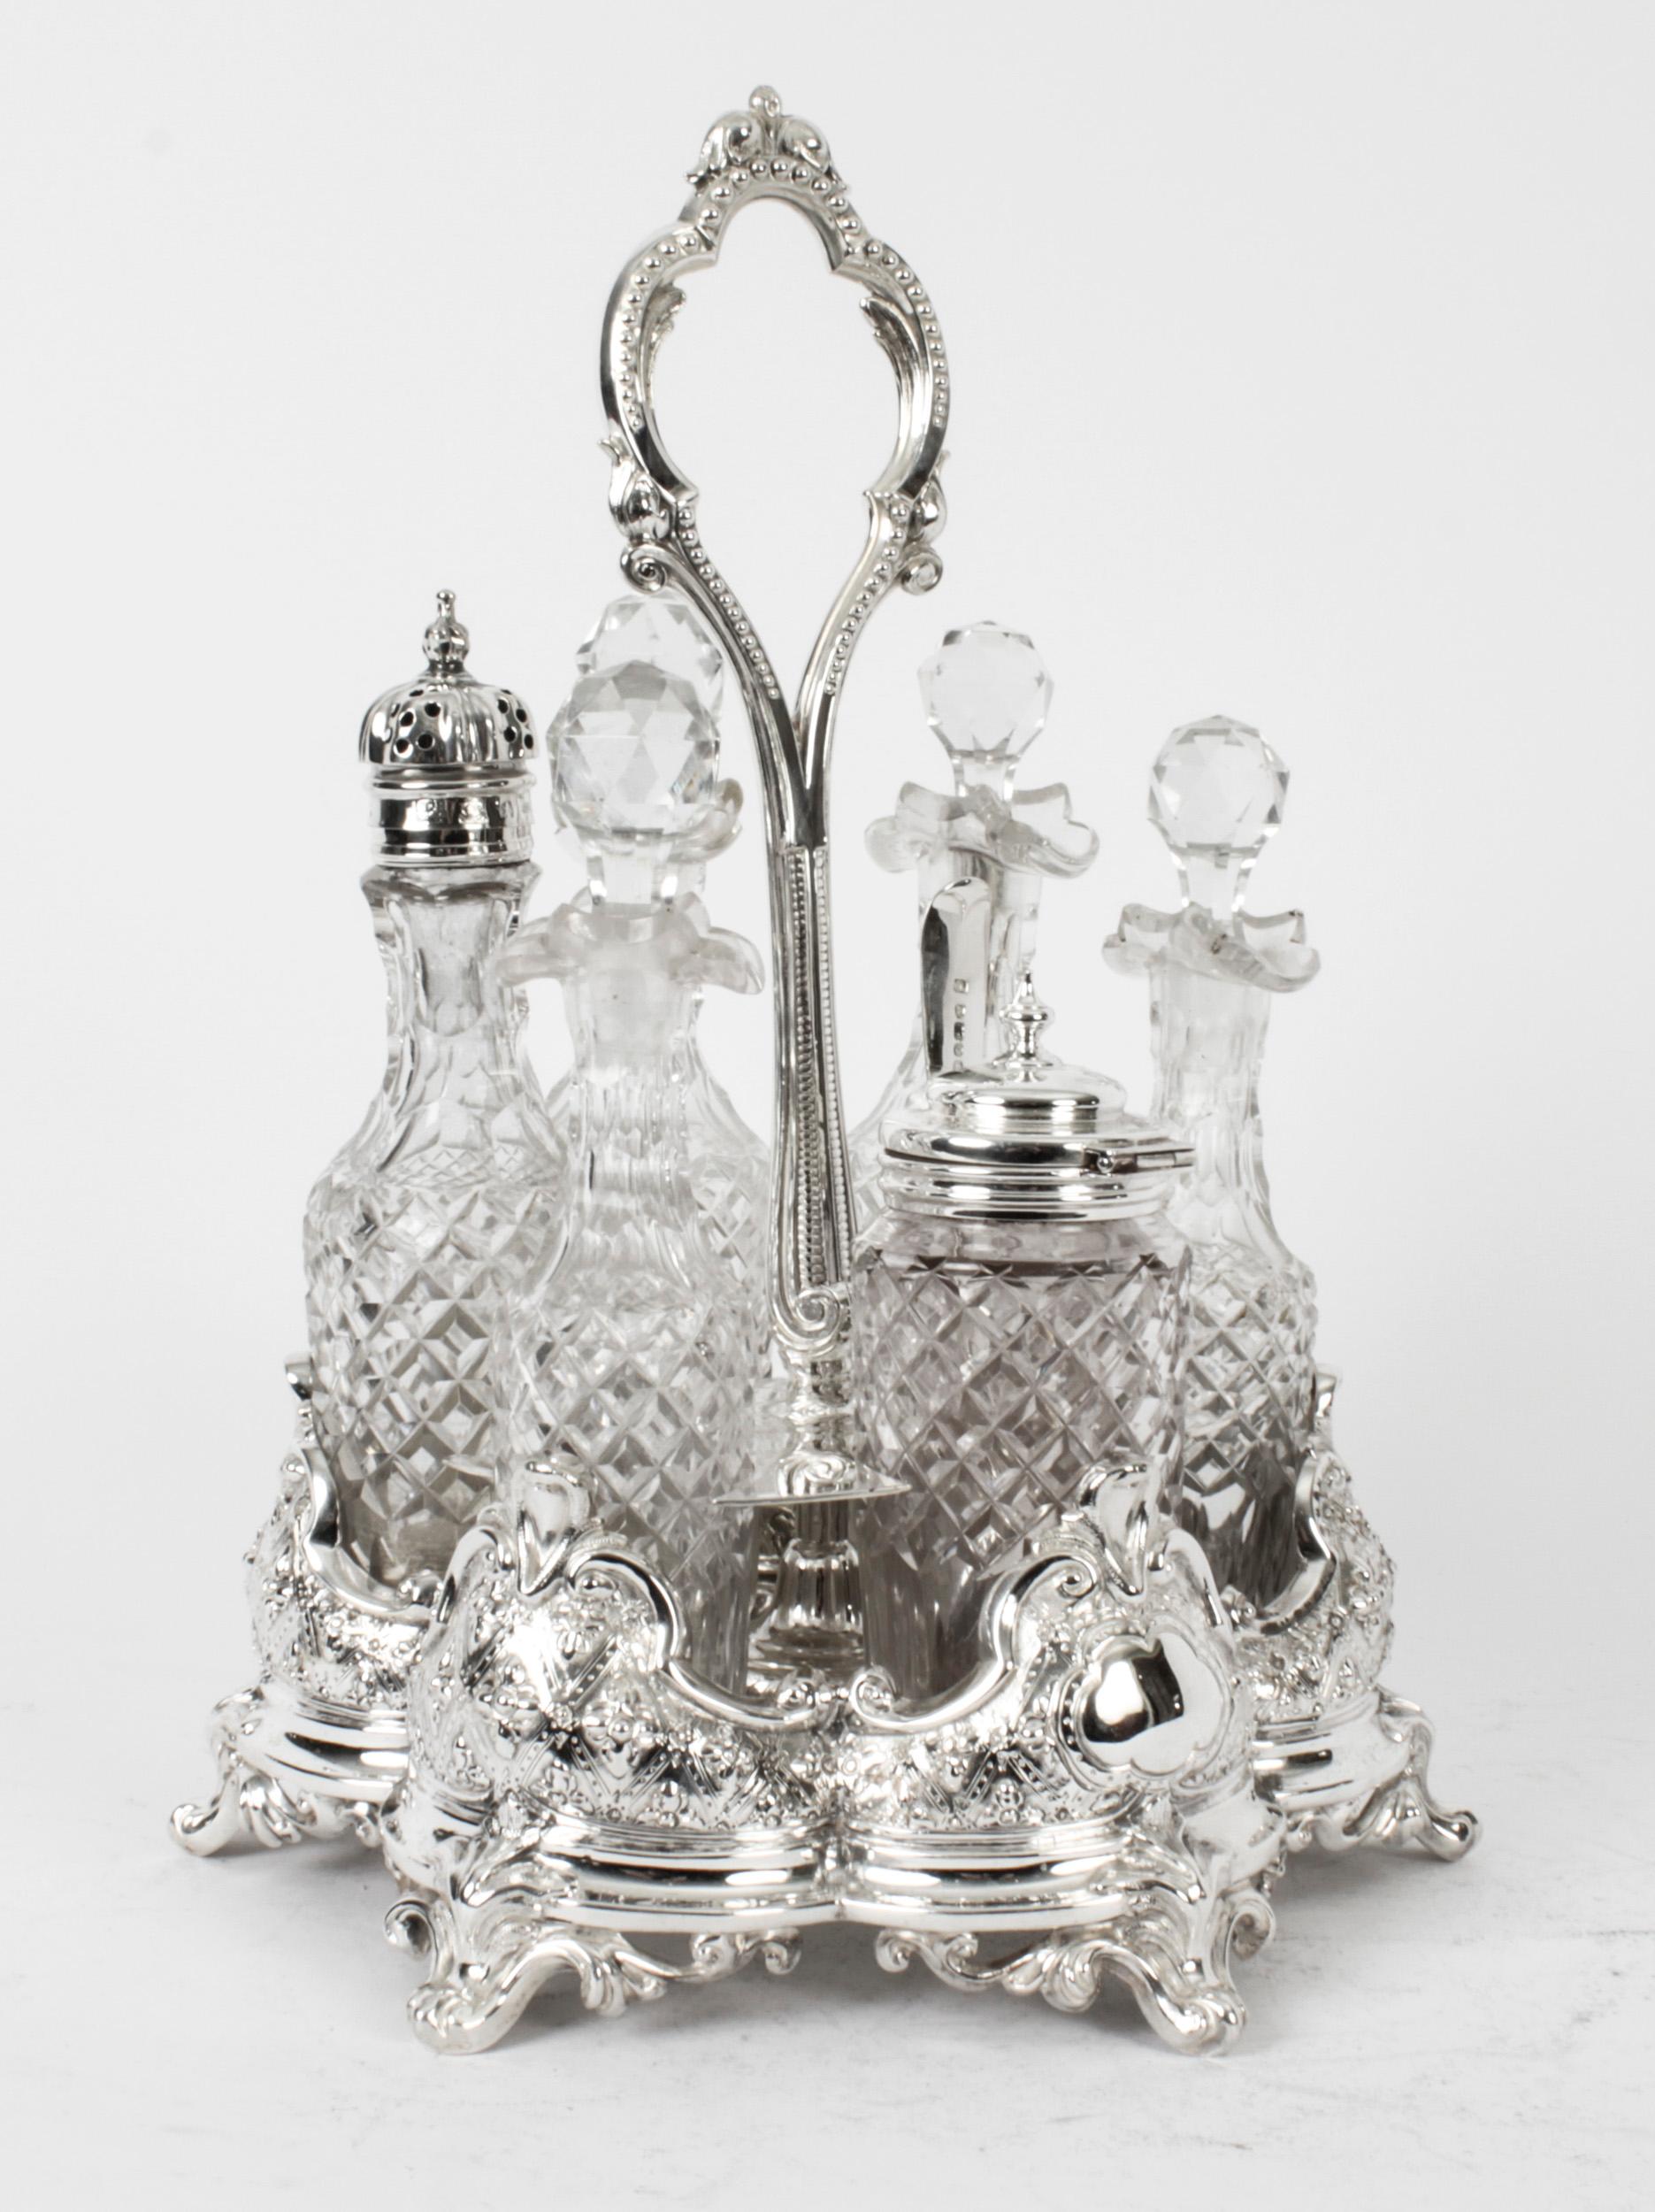 This is a gorgeous antique silver plated cruet set bearing the makers mark of the renowned silversmith family, Henry Wilkinson & Co, and circa 1860 in date.
 
The set comprises a beautifully decorative silver plated cruet stand holding six